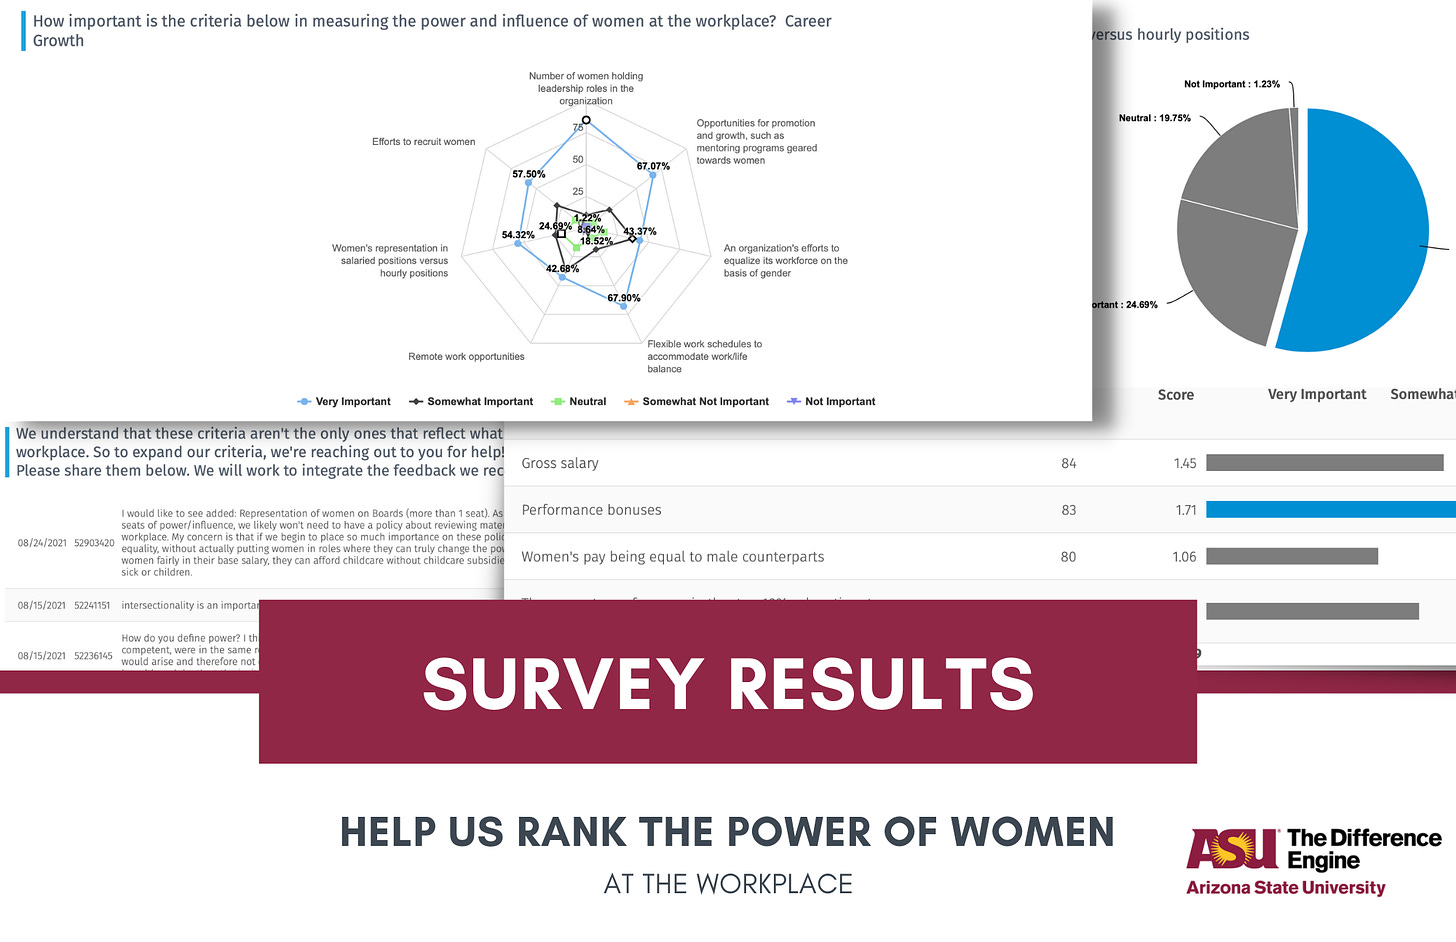 Survey Results: Help us rank the power of women